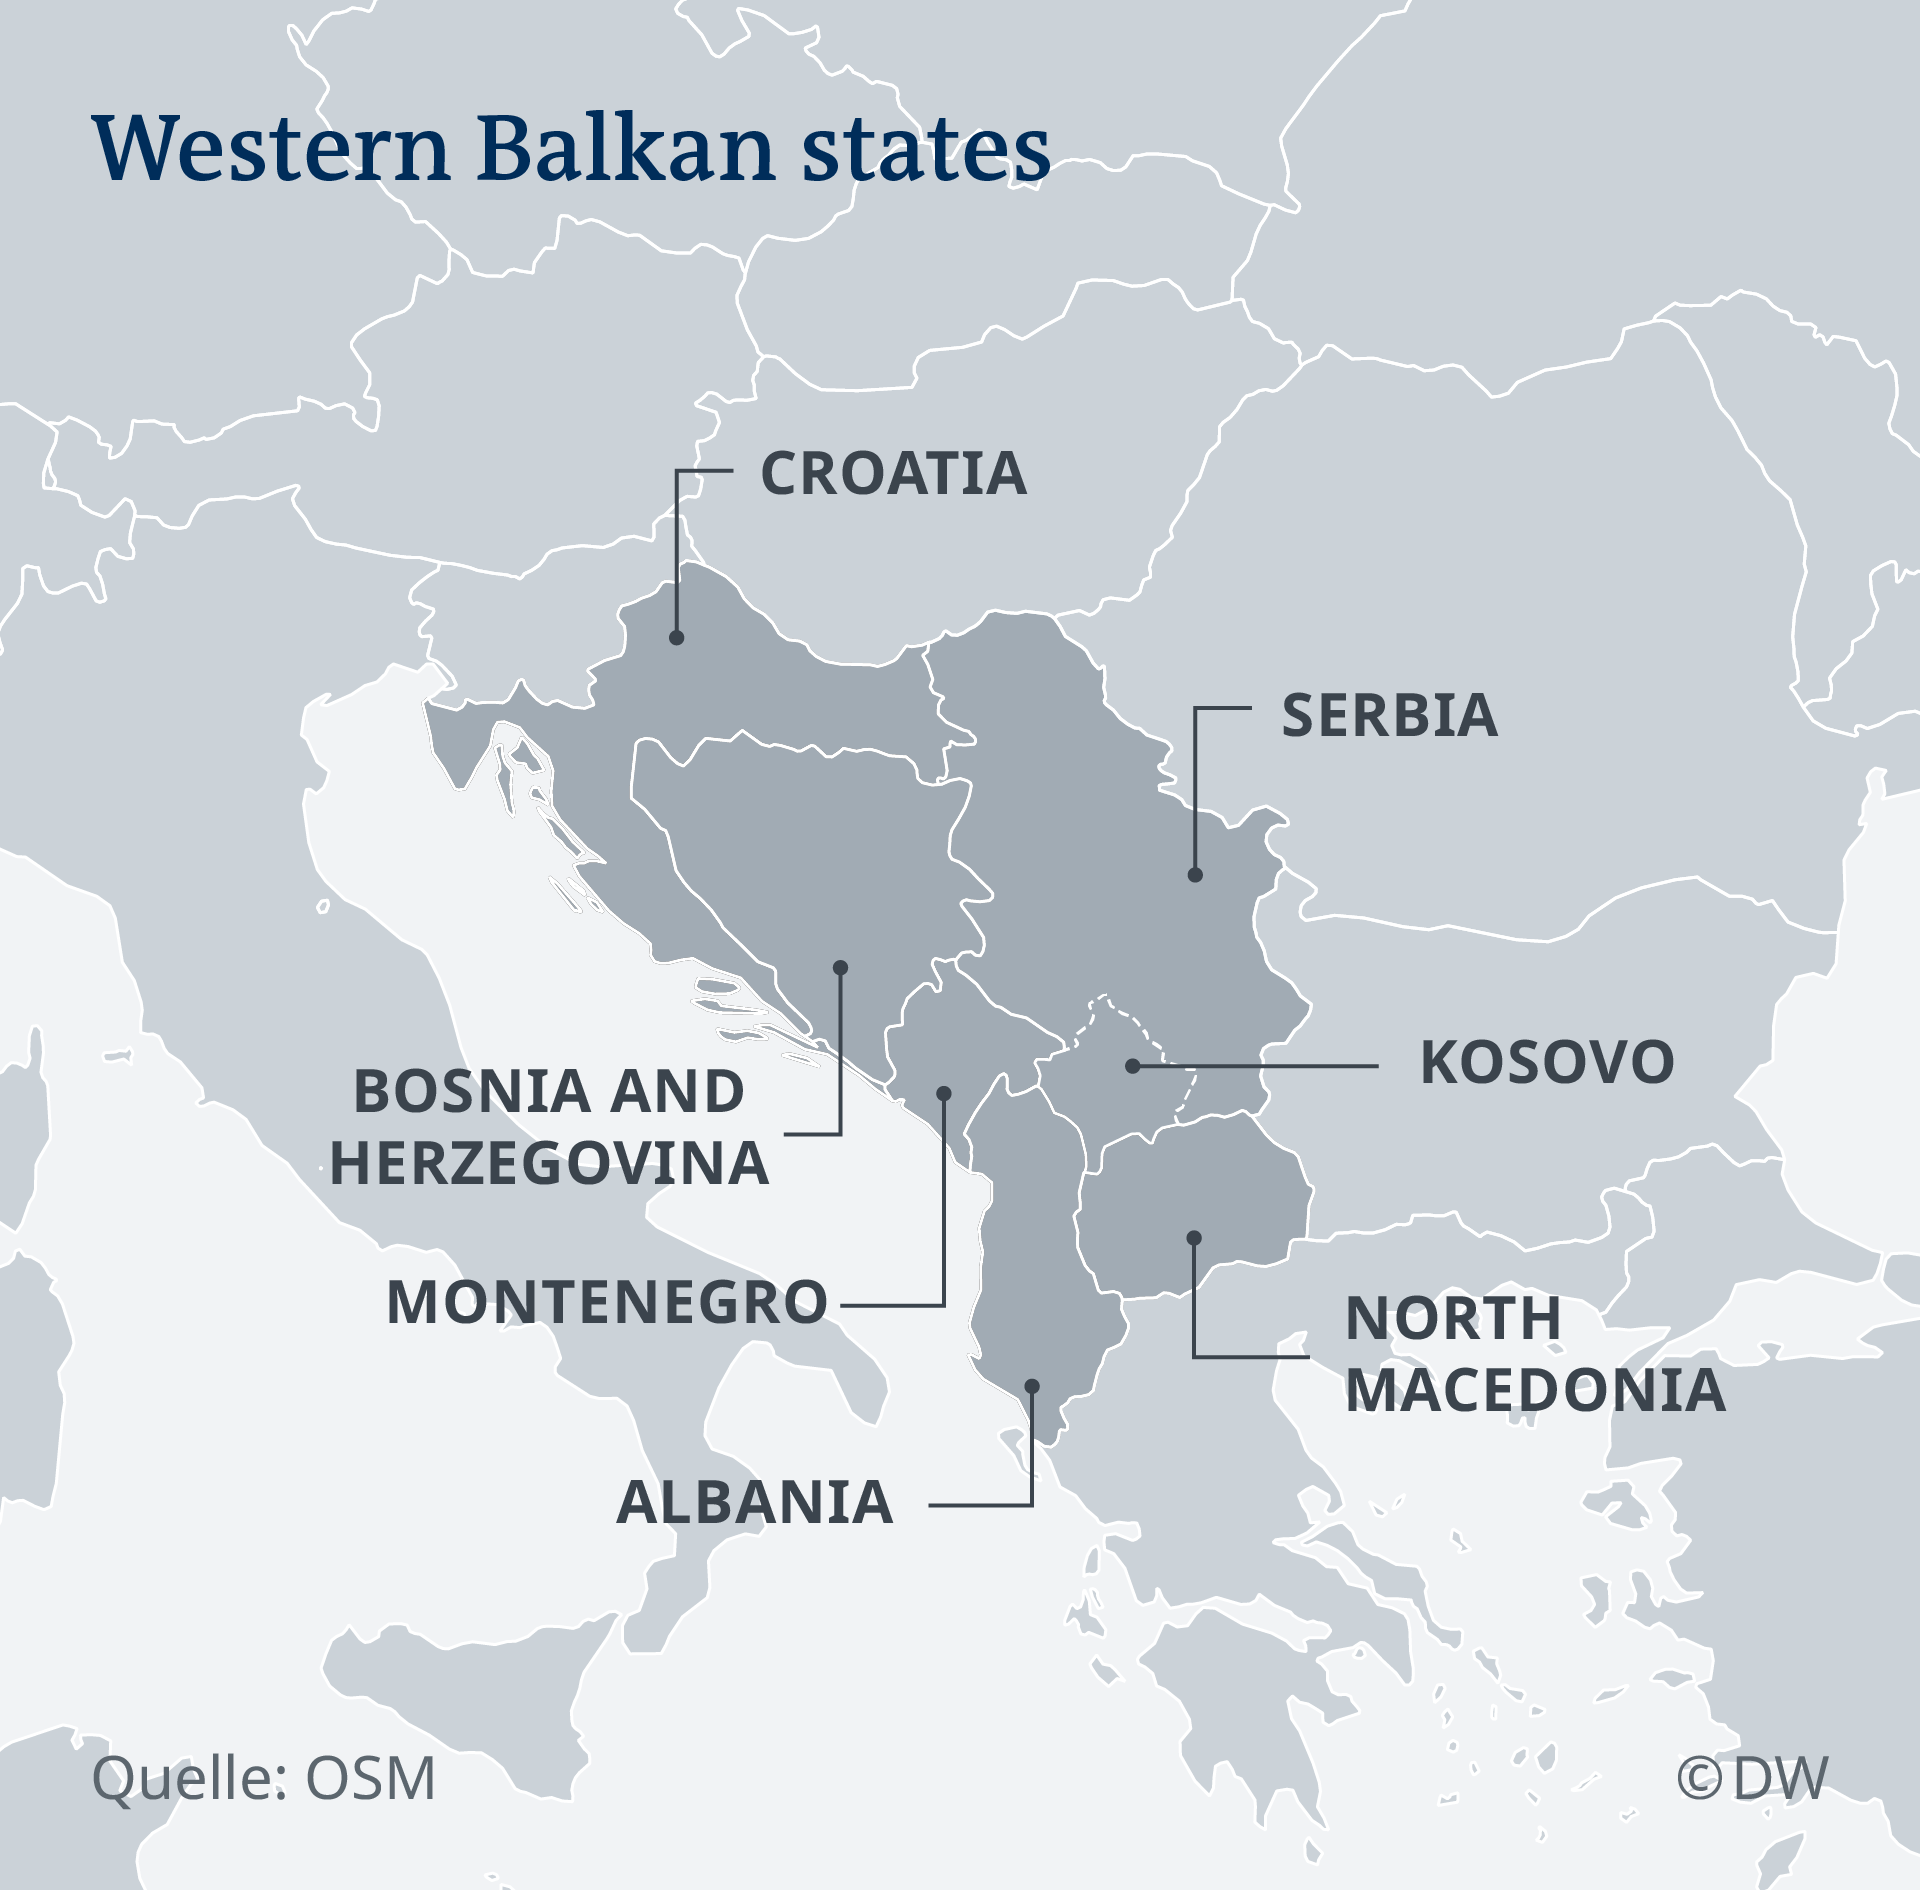 DW Infographic: Western Balkan states